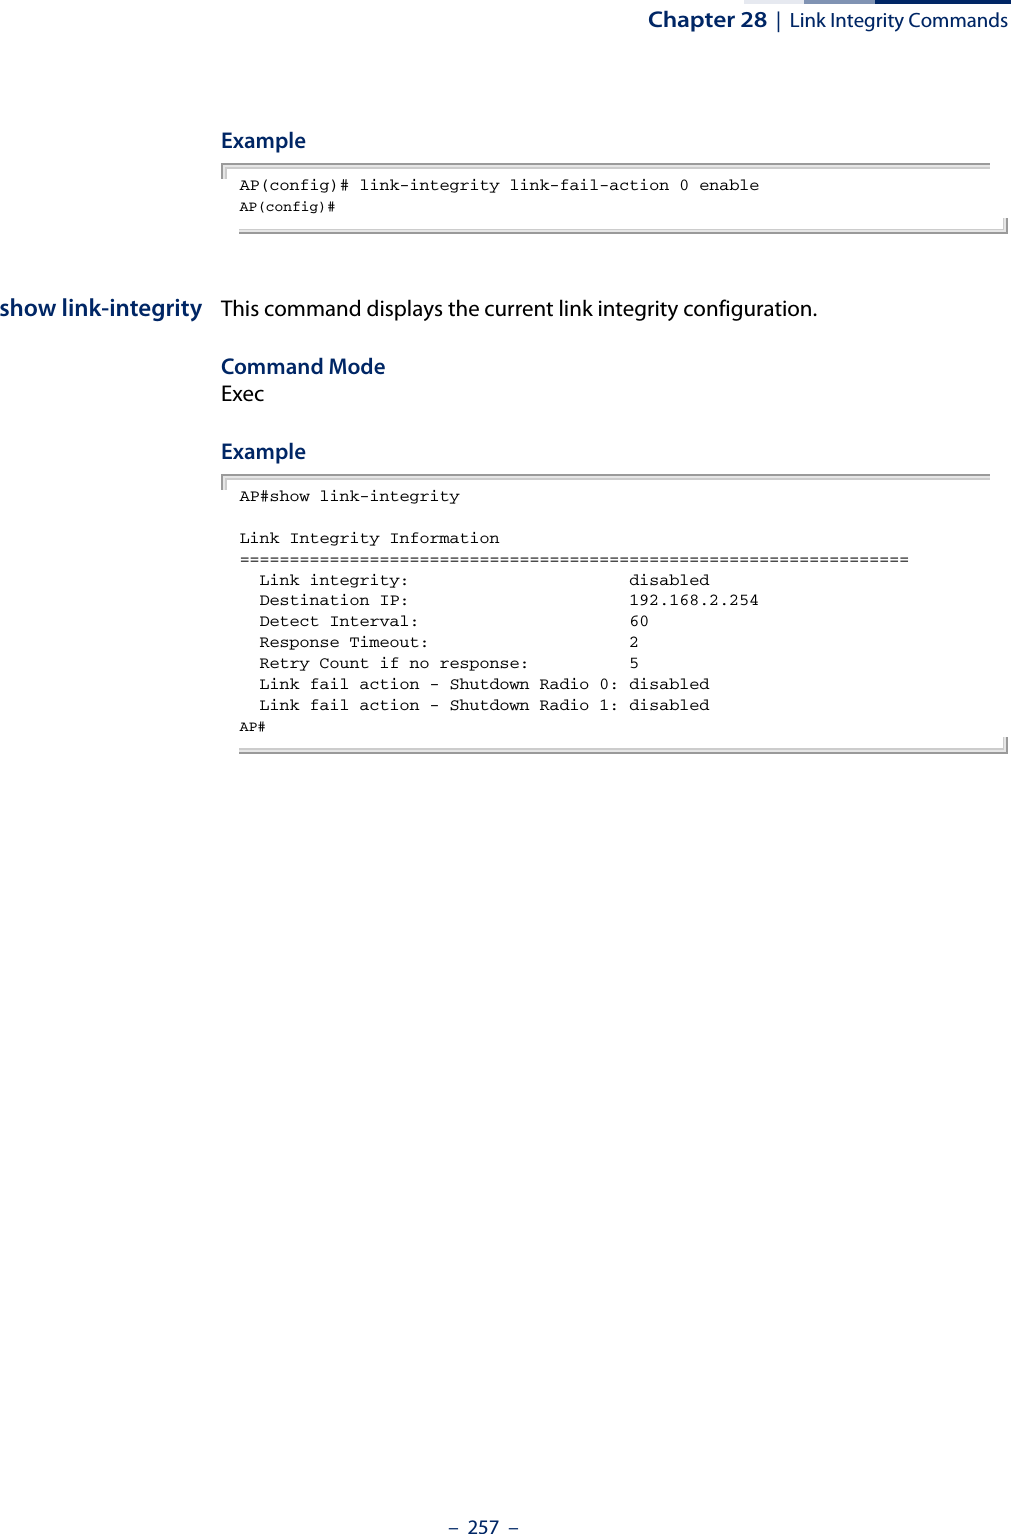 Chapter 28  |  Link Integrity Commands–  257  –ExampleAP(config)# link-integrity link-fail-action 0 enableAP(config)# show link-integrity This command displays the current link integrity configuration.Command Mode ExecExampleAP#show link-integrityLink Integrity Information===================================================================  Link integrity:                      disabled  Destination IP:                      192.168.2.254  Detect Interval:                     60  Response Timeout:                    2  Retry Count if no response:          5  Link fail action - Shutdown Radio 0: disabled  Link fail action - Shutdown Radio 1: disabledAP# 